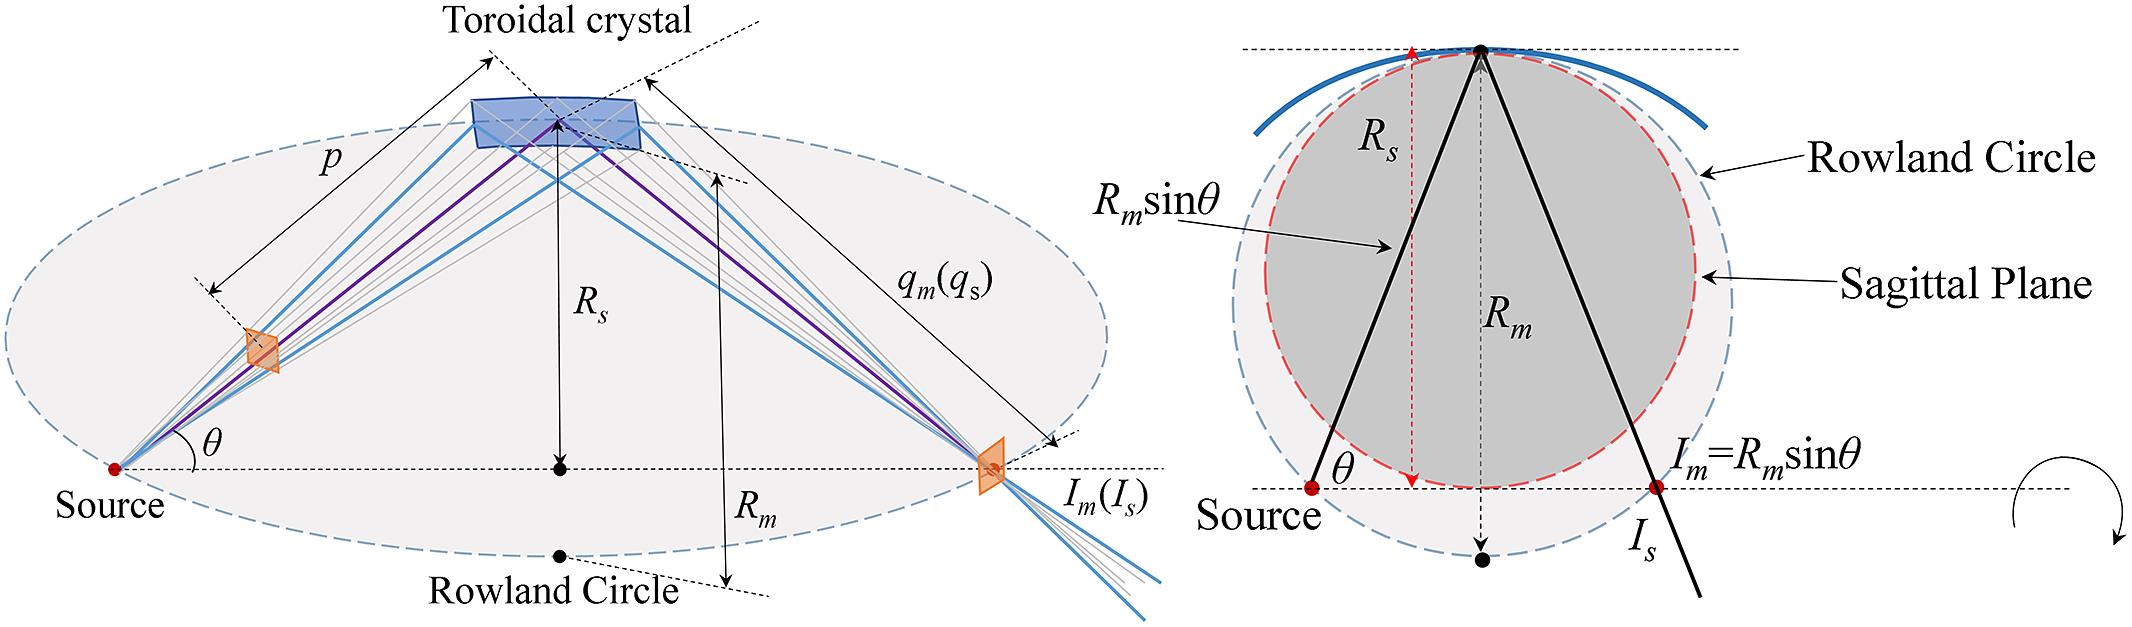 Working principle of a toroidal crystal-based imaging system. In the case of a toroidal crystal, the rays from the sagittal and meridional planes are focused at the same focal point. The toroidal crystal can be used for imaging self-luminous objects without requiring a Bragg angle close to 90°.